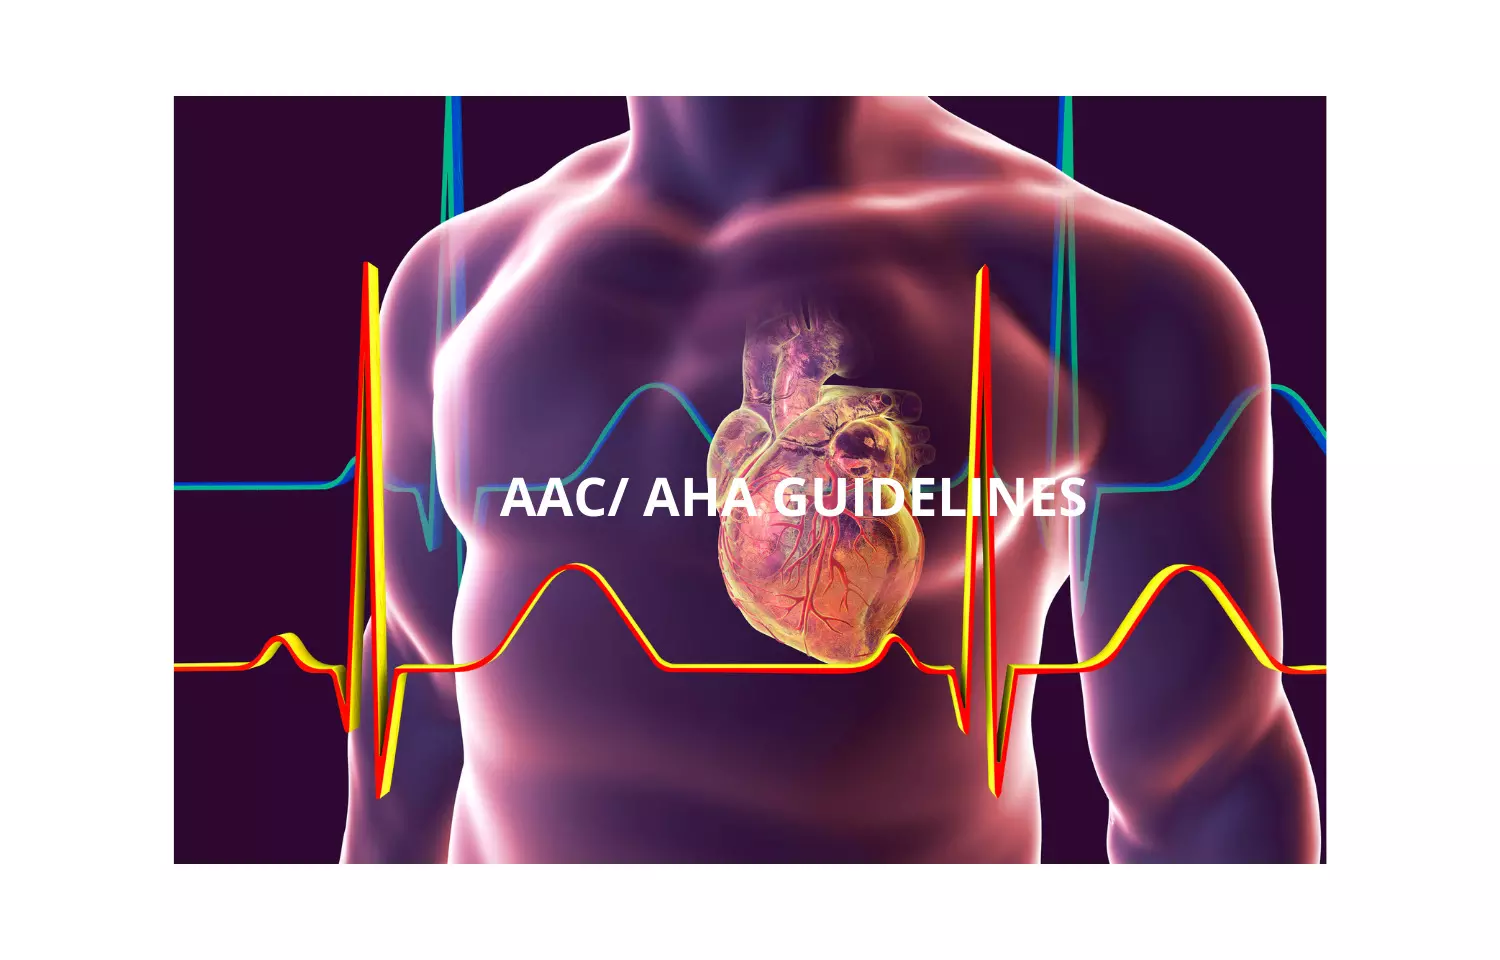 ACC/AHA guidelines 2021 not acknowledged by cardiac surgeons